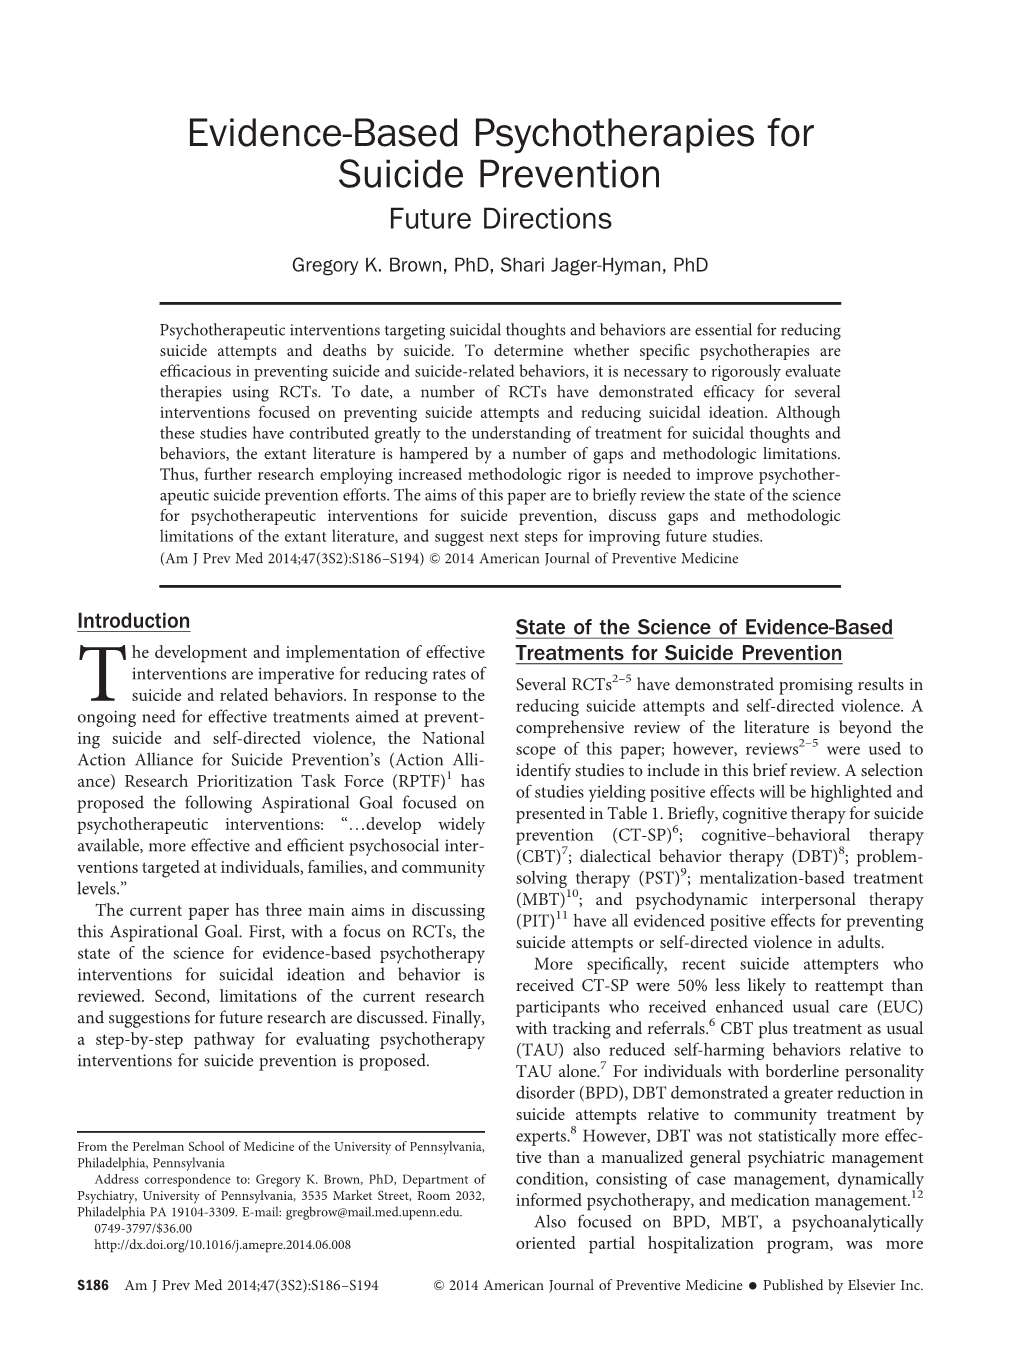 Evidence-Based Psychotherapies for Suicide Prevention Future Directions Gregory K